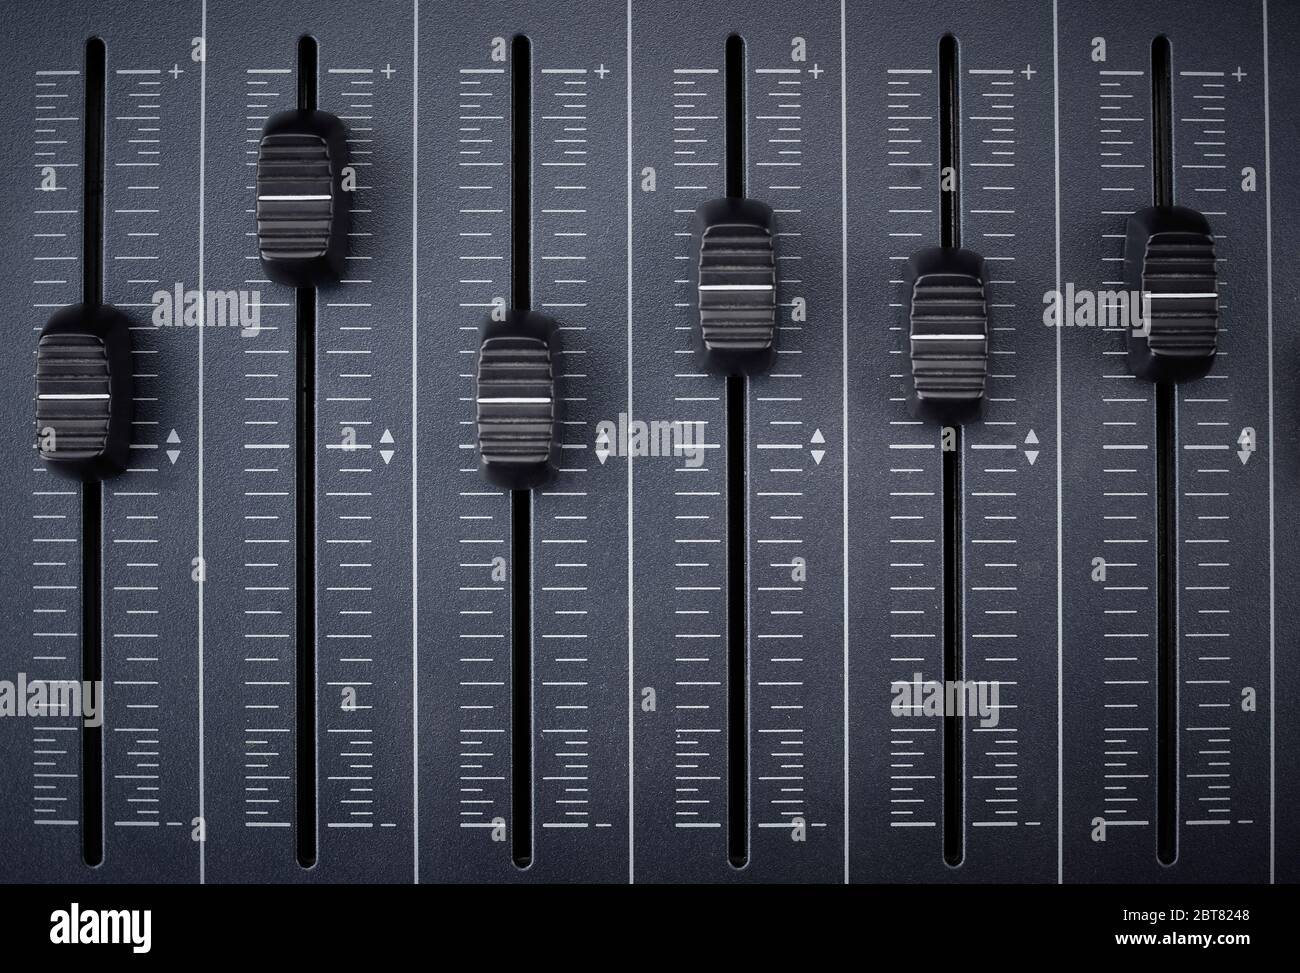 faders of a mixer for audio production and control of equalization and mixing using midi technology Stock Photo